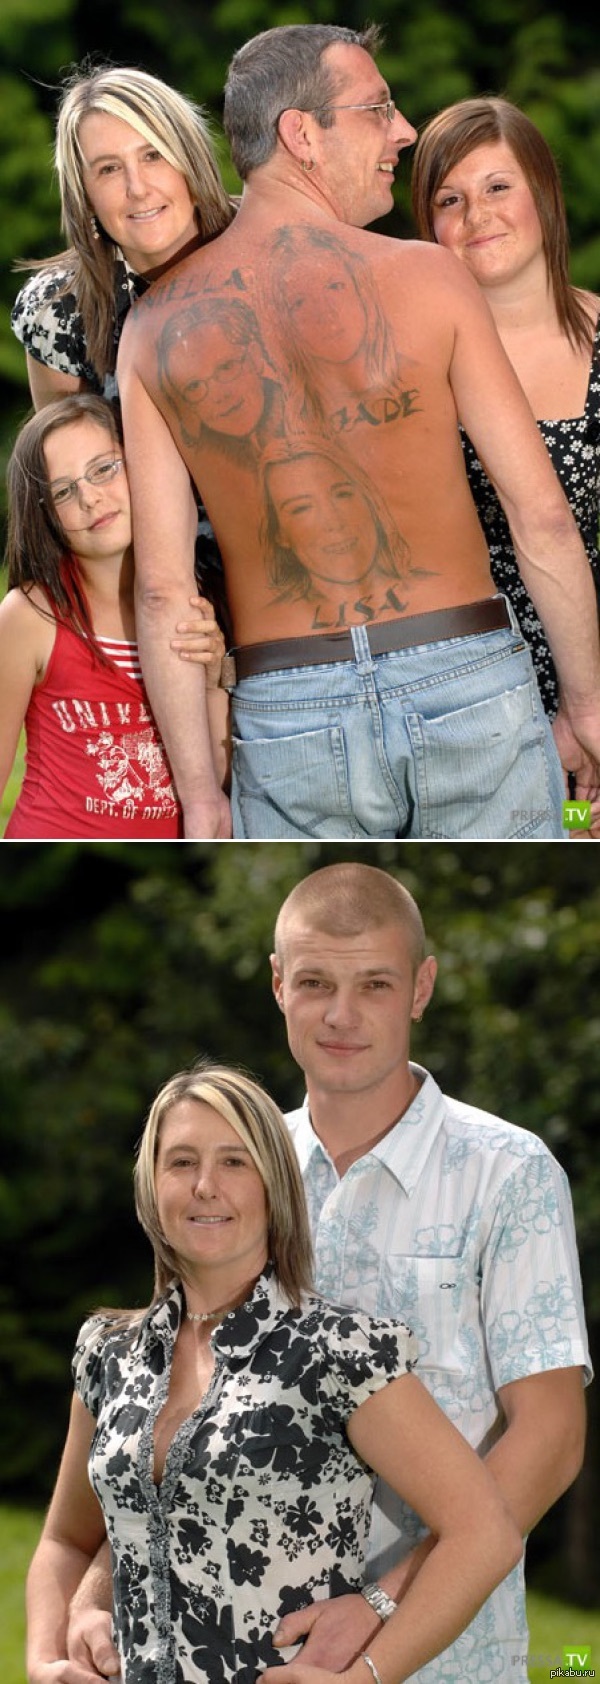 On the 15th anniversary of his life together with his wife, Alan decided to immortalize this event with a tattoo on his back. - NSFW, Tattoo, , It's not meant to be, Treason, Lover, Cuckold, Longpost, From the network